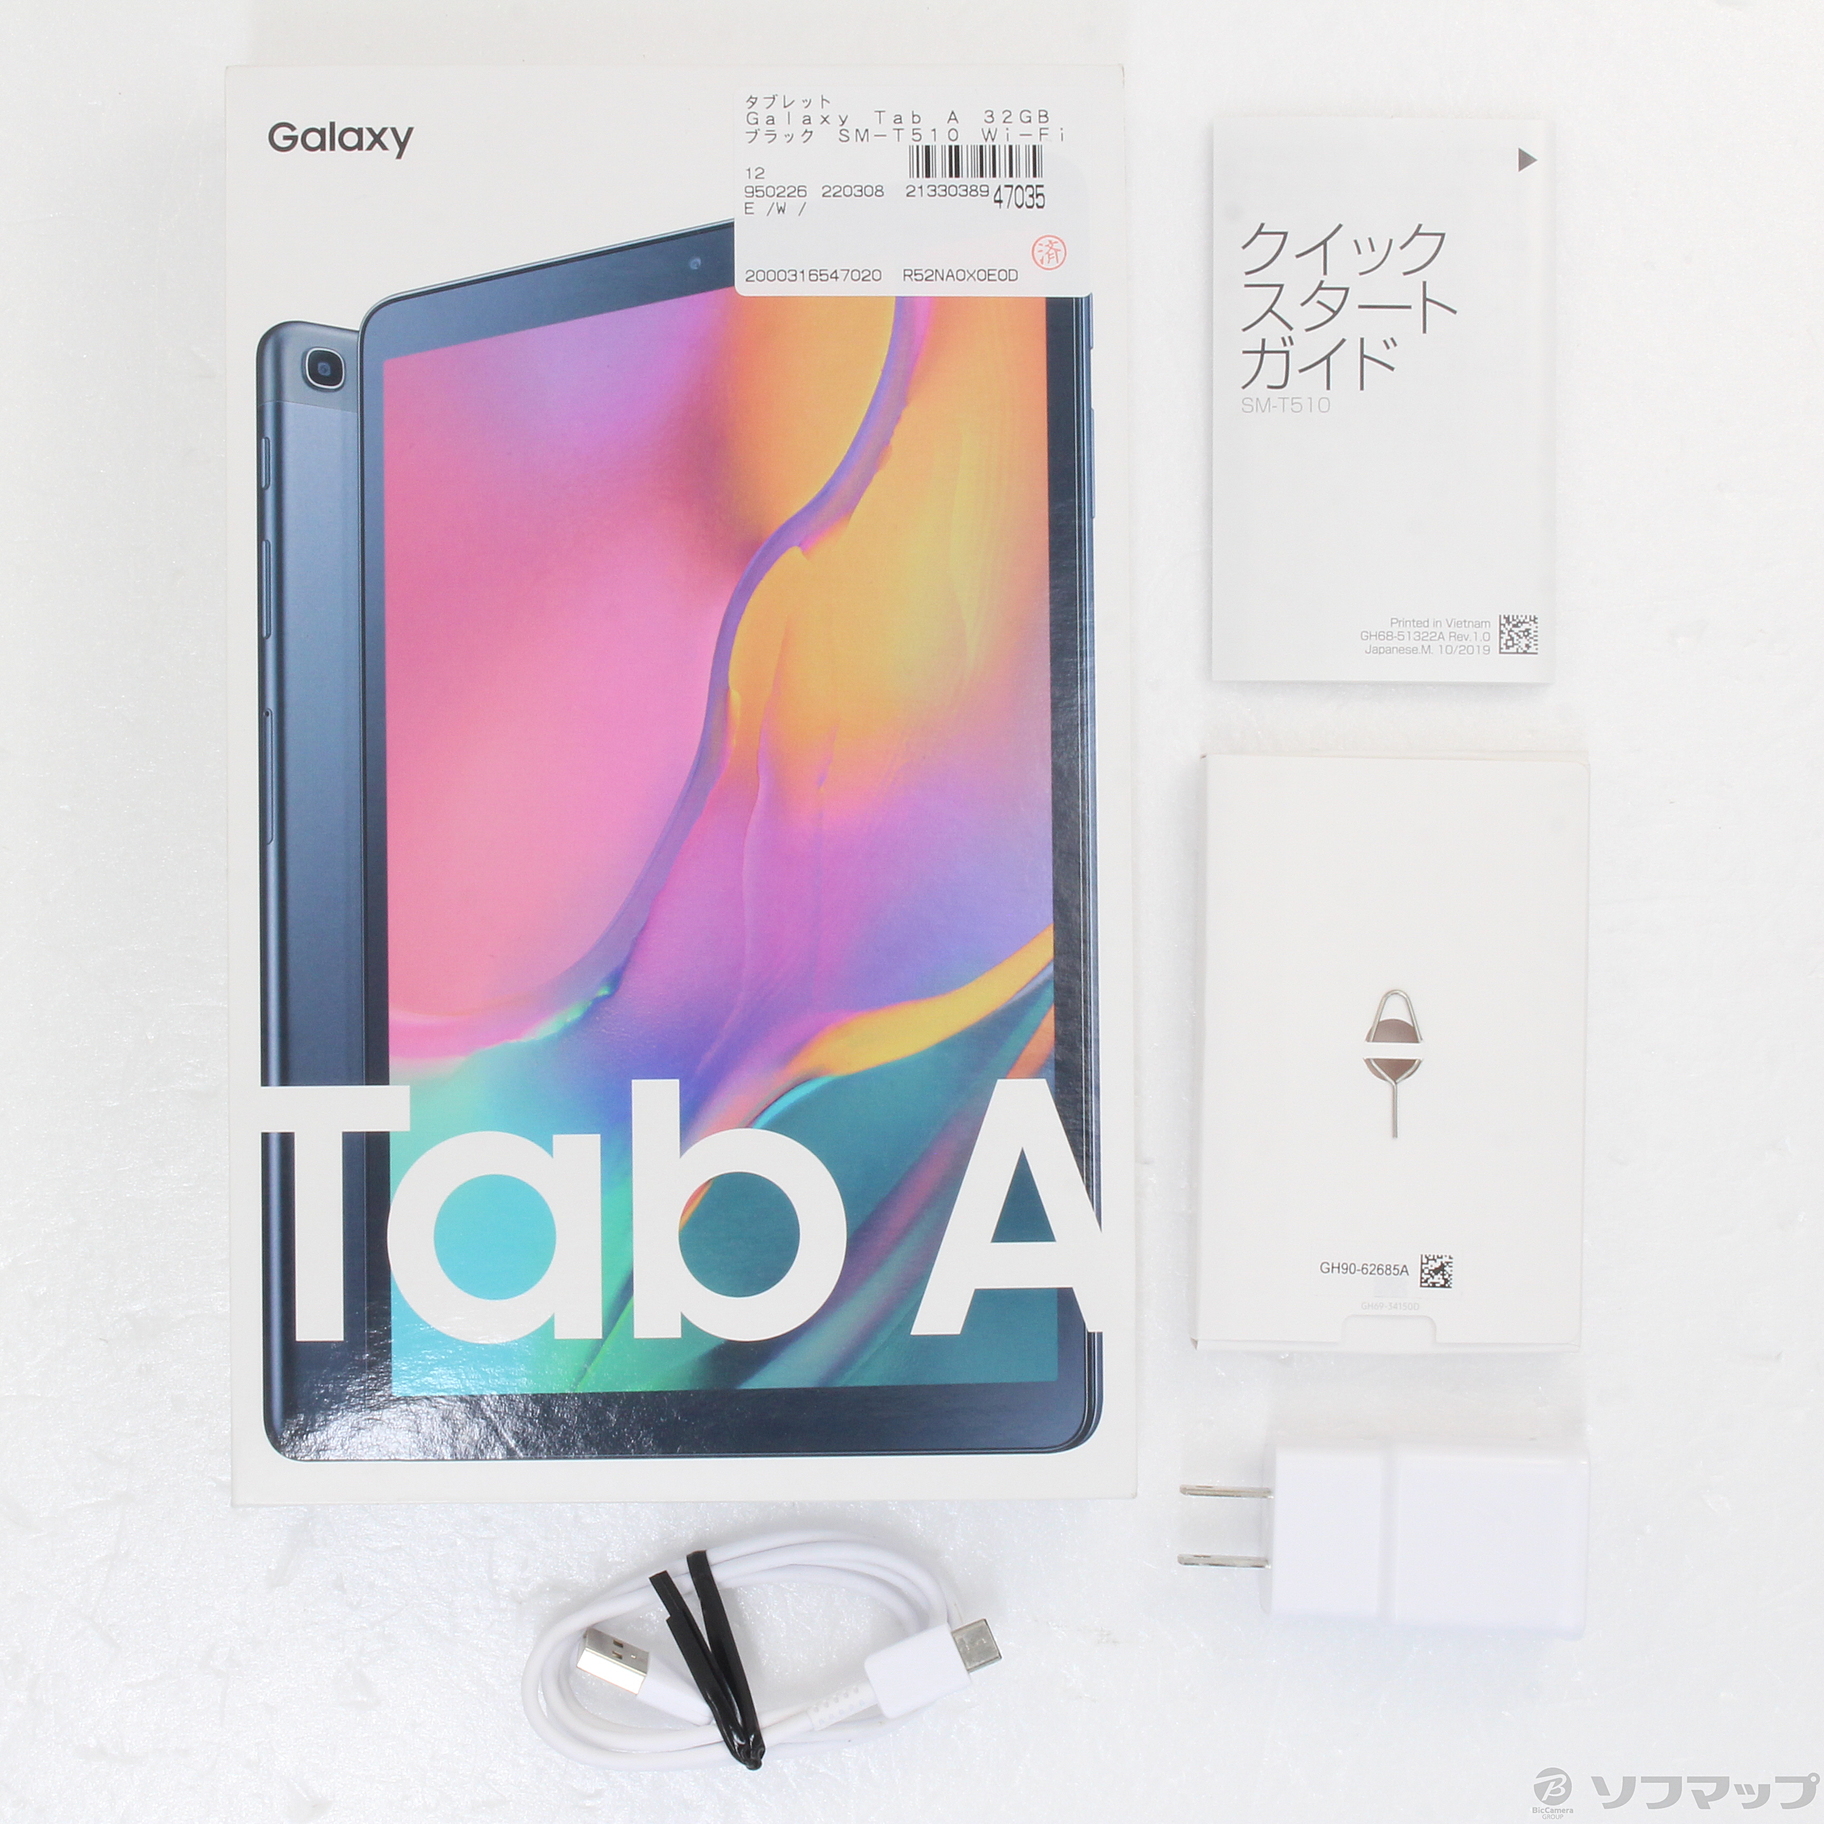 Galaxy Tab A SM-T510 Androidタブレット - Androidタブレット本体